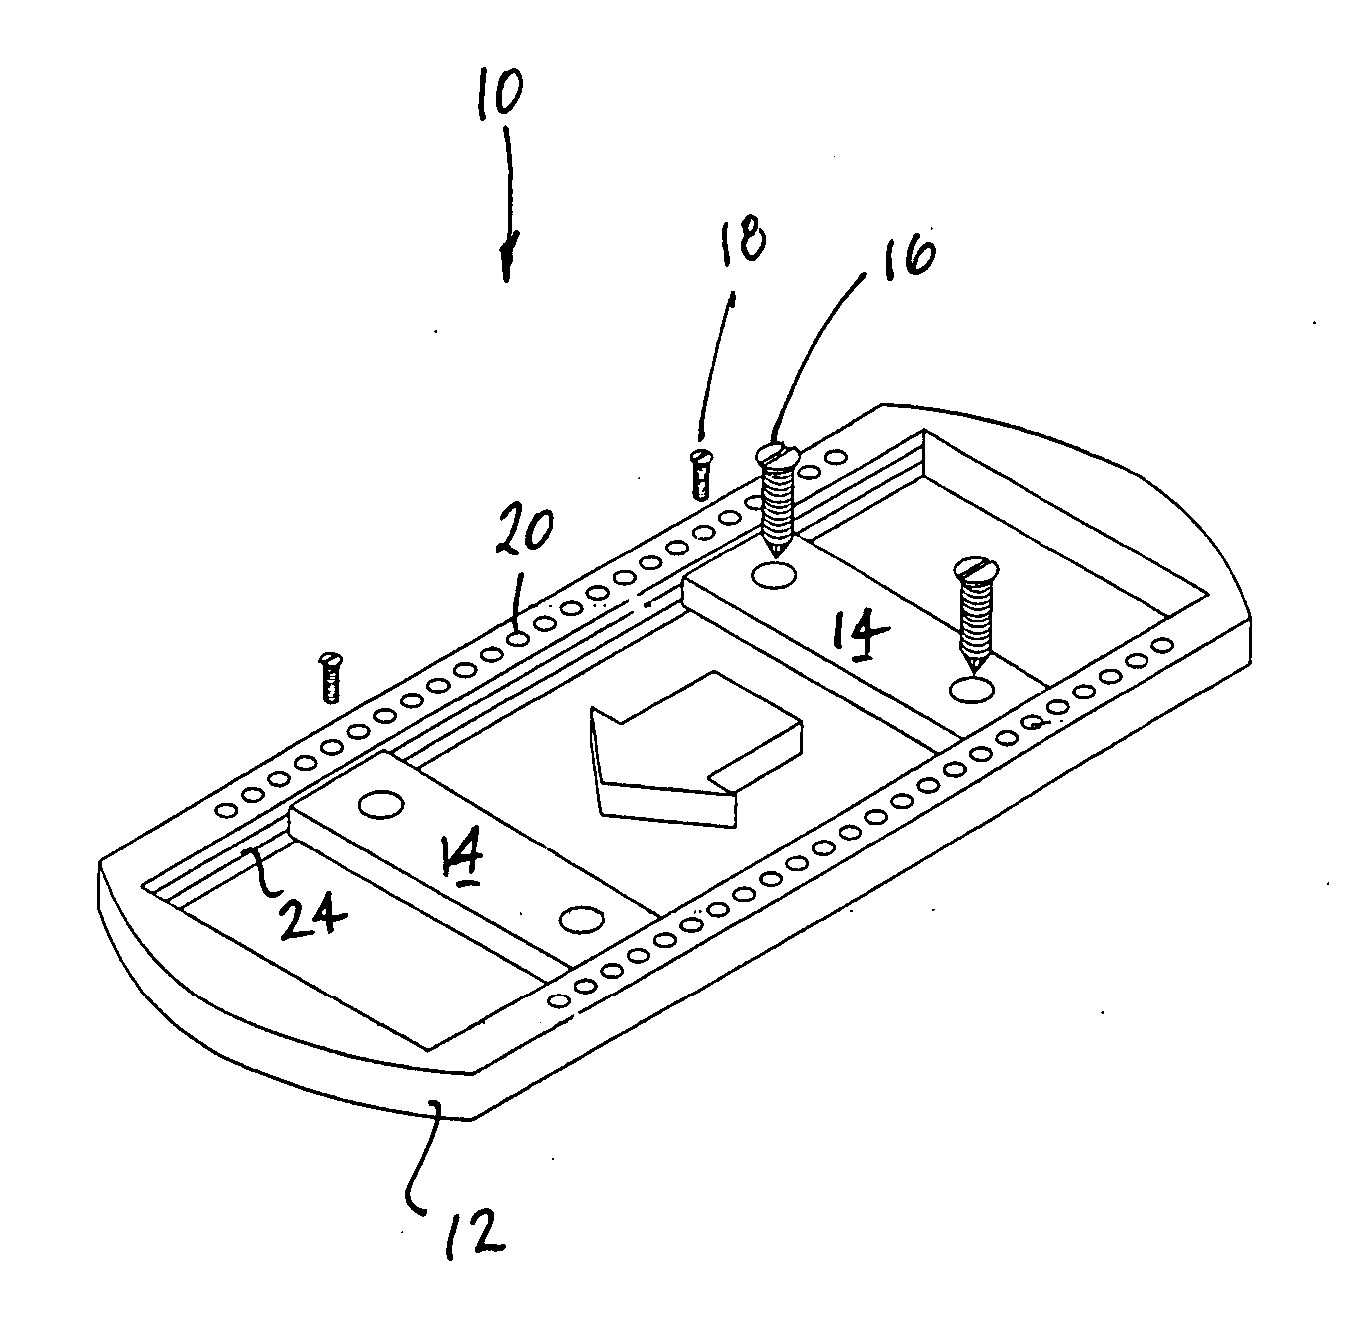 Orthopedic fusion plate having both active and passive subsidence controlling features